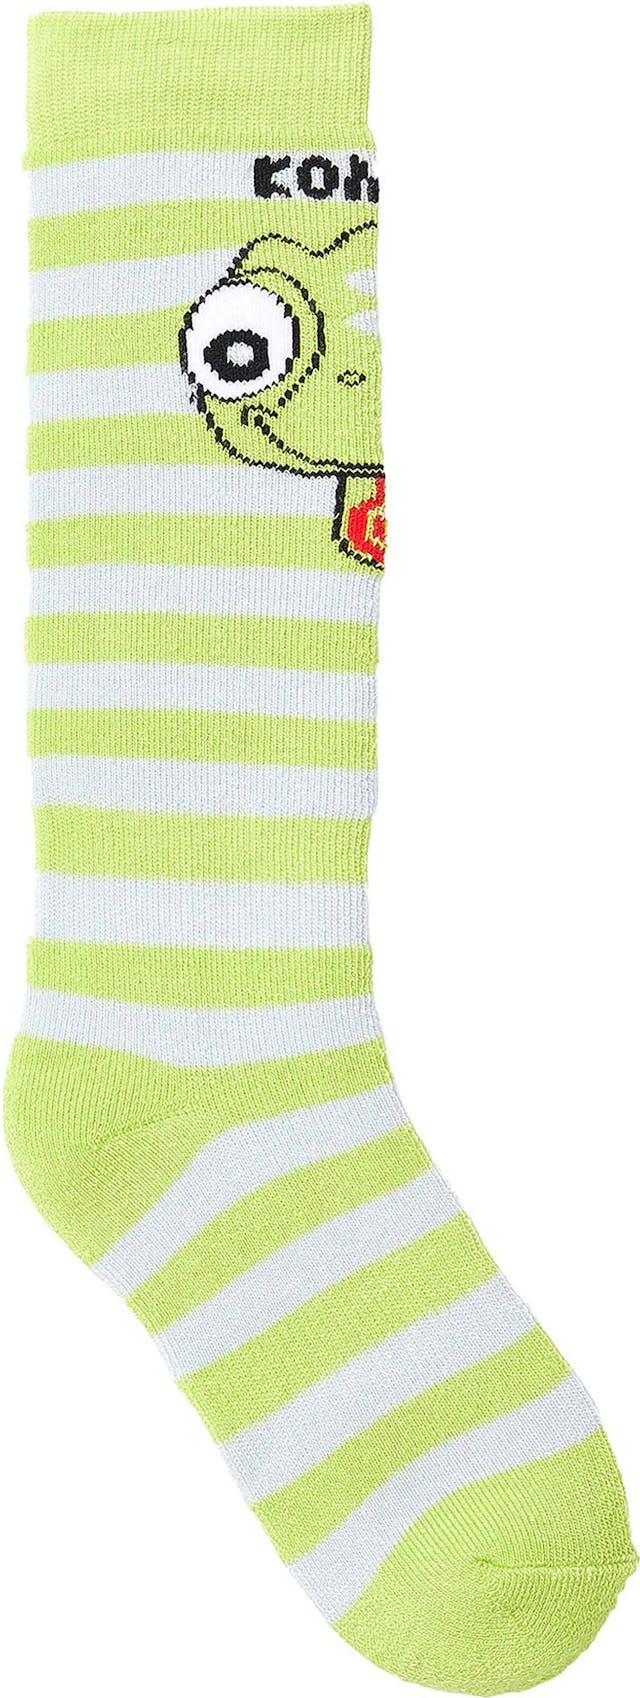 Product image for Imaginary Friends Heavy Socks - Kids